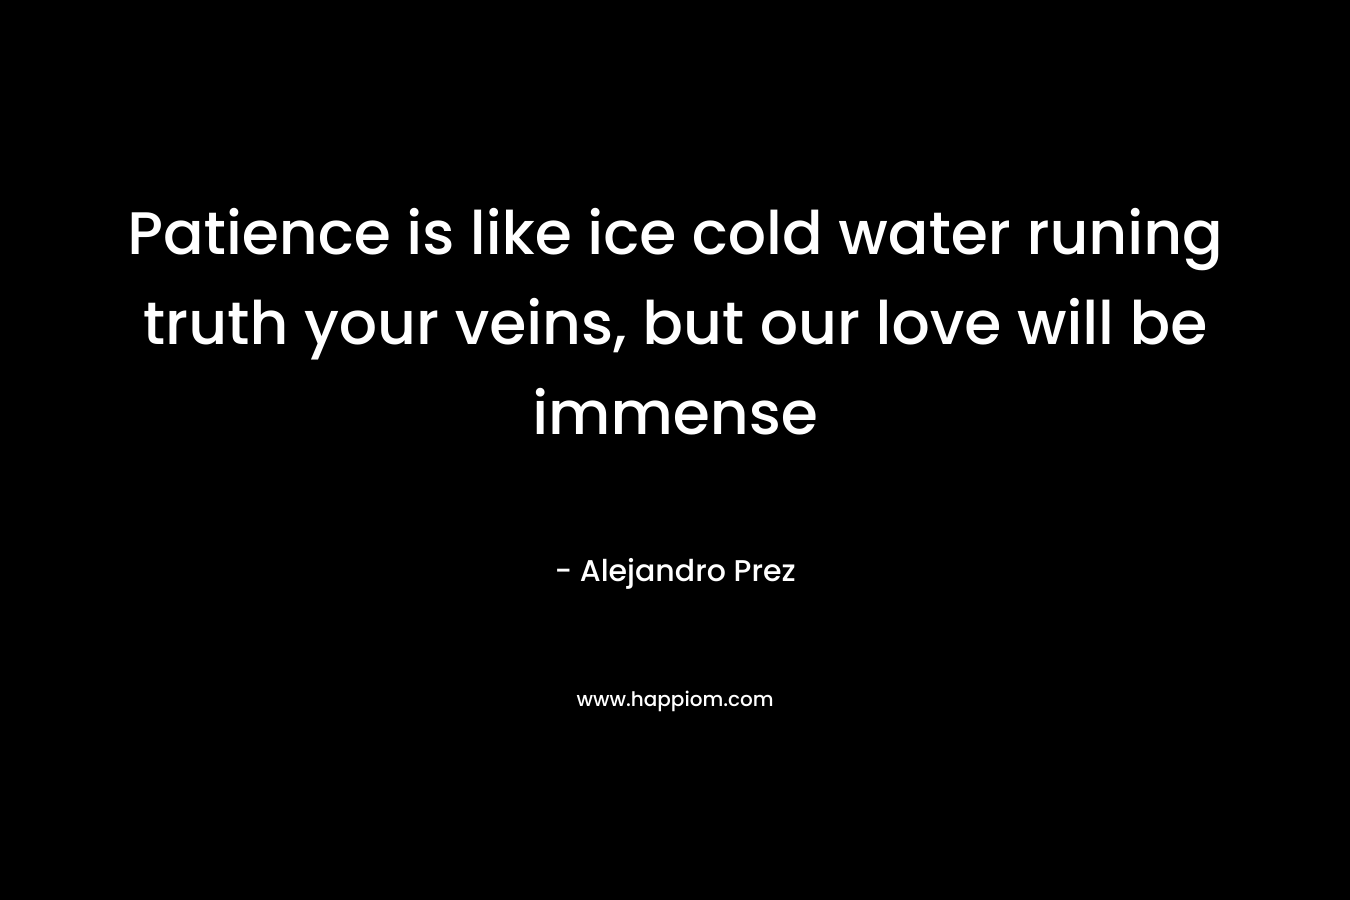 Patience is like ice cold water runing truth your veins, but our love will be immense